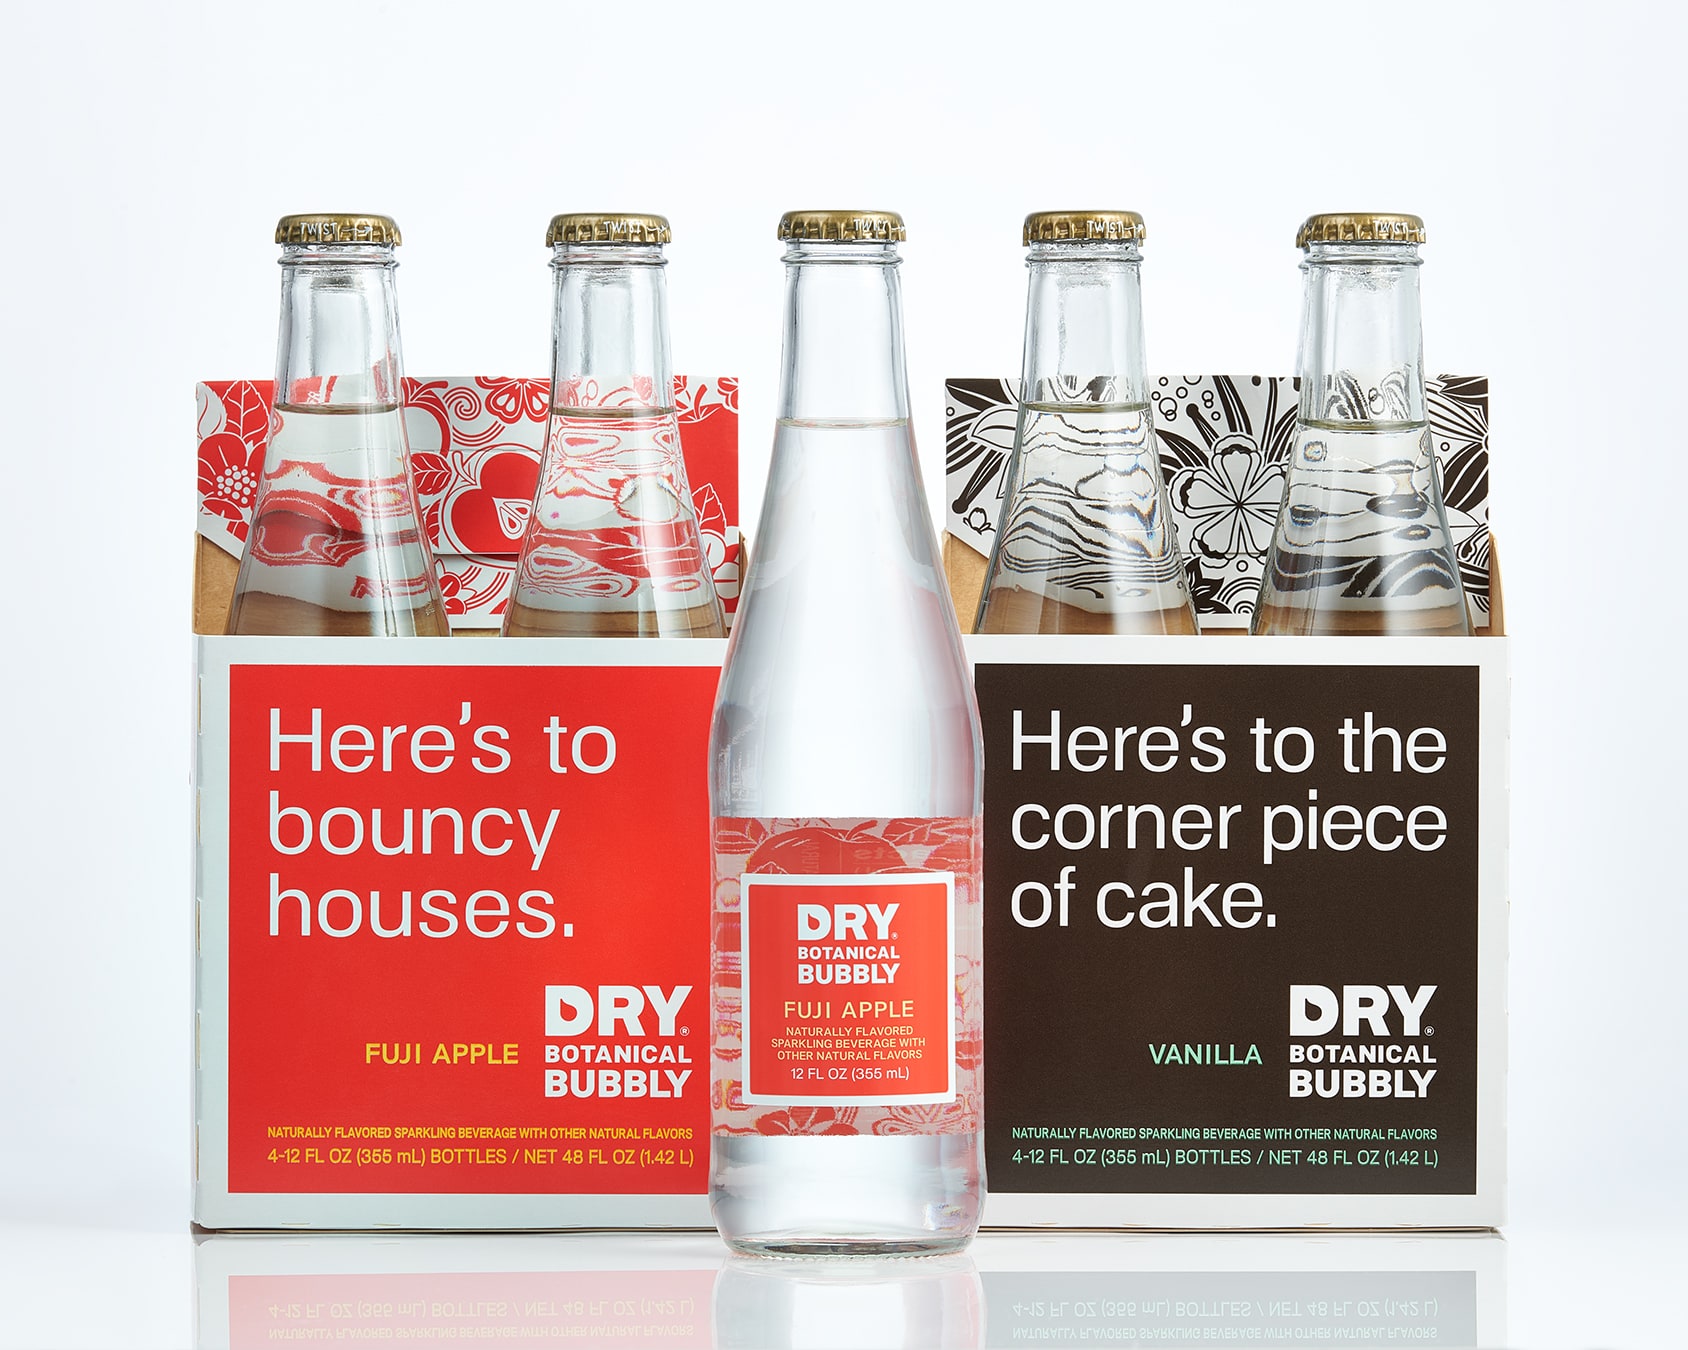 Dry Botanical Bubbly package design Fuji Apple and Vanilla flavors